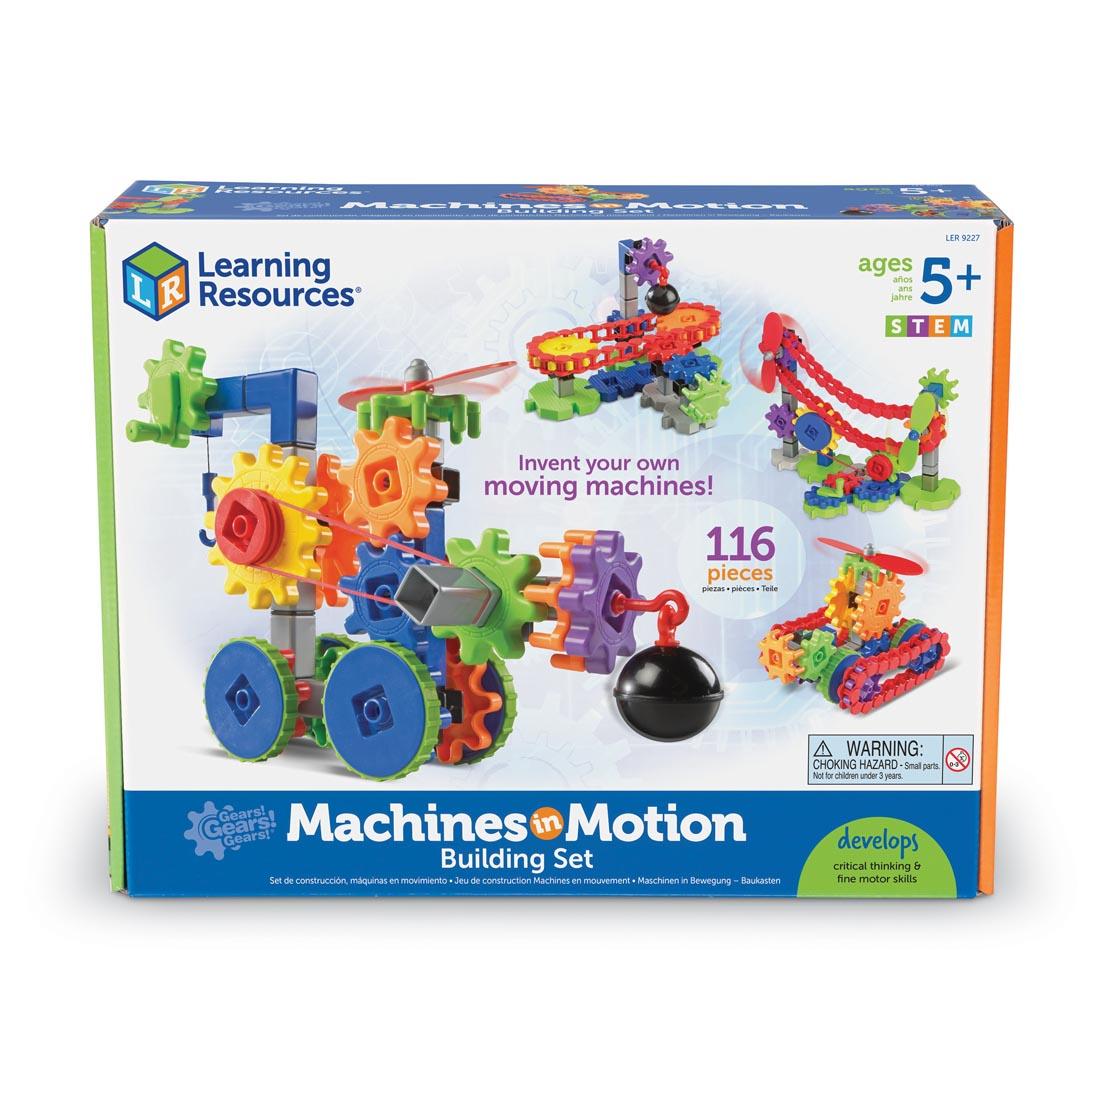 Machines in Motion Building Set